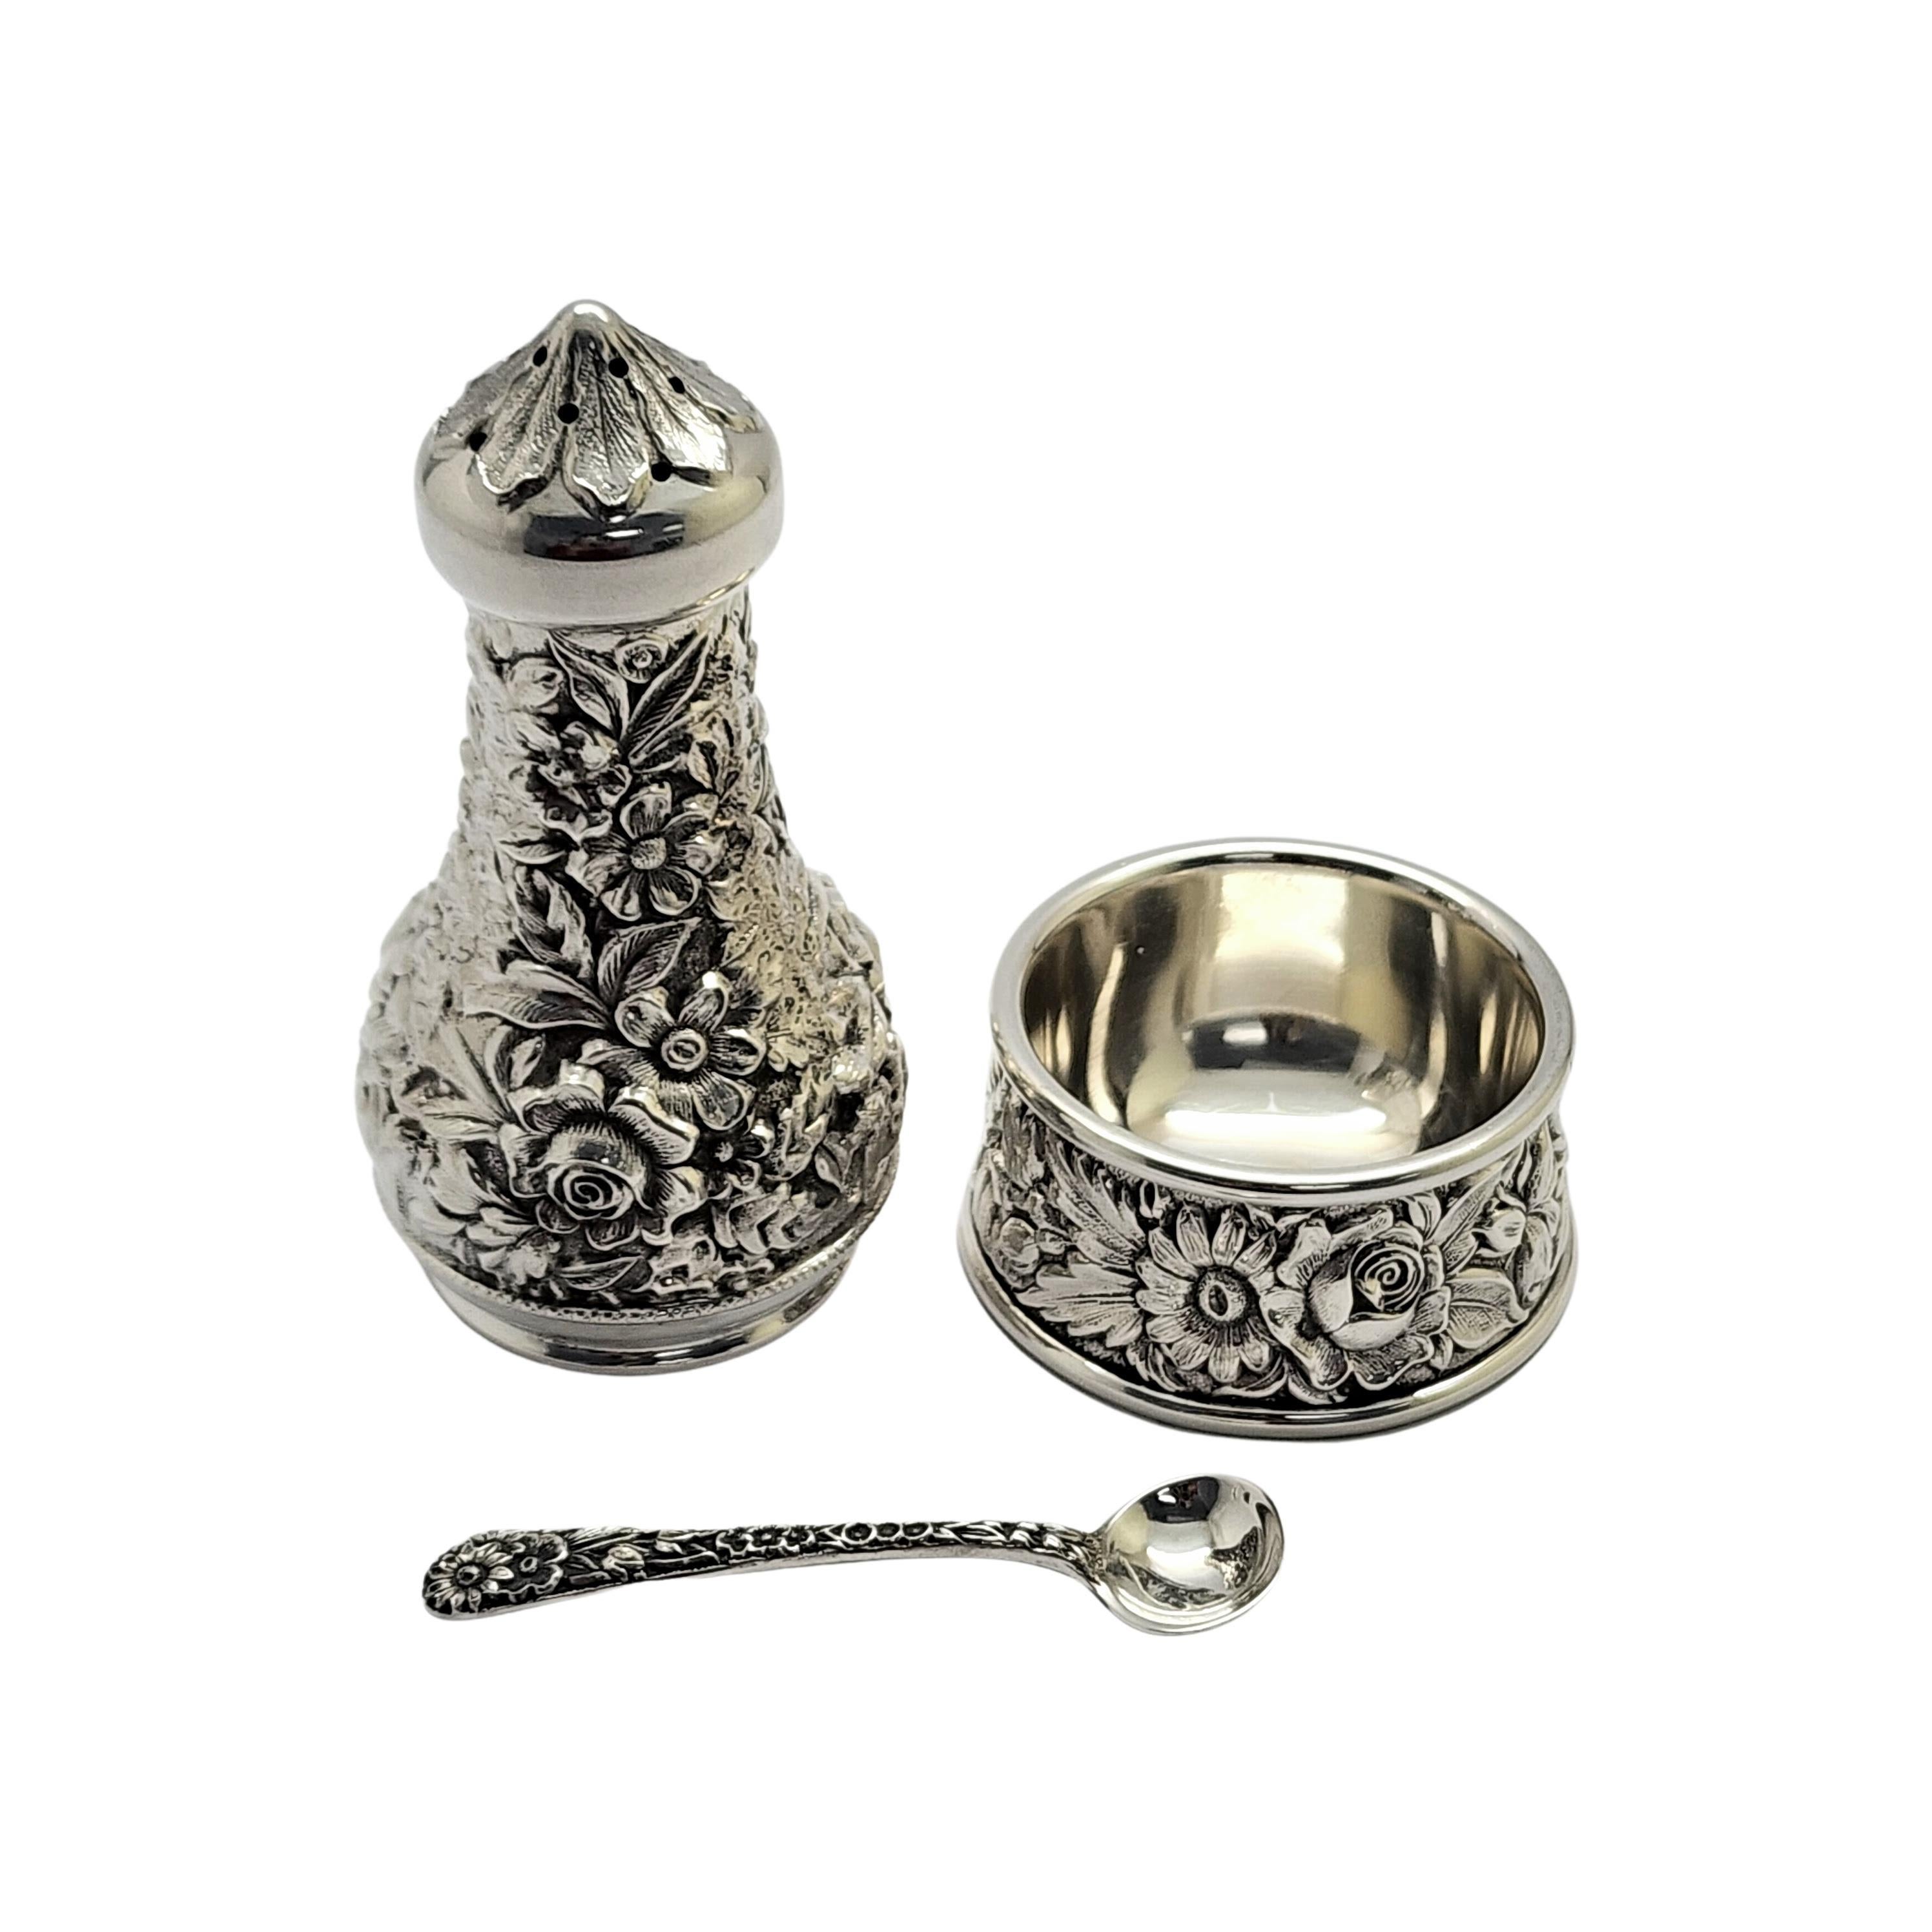 S Kirk & Son Sterling 59A Repousse Salt Cellar with Spoon and Pepper Shaker 3